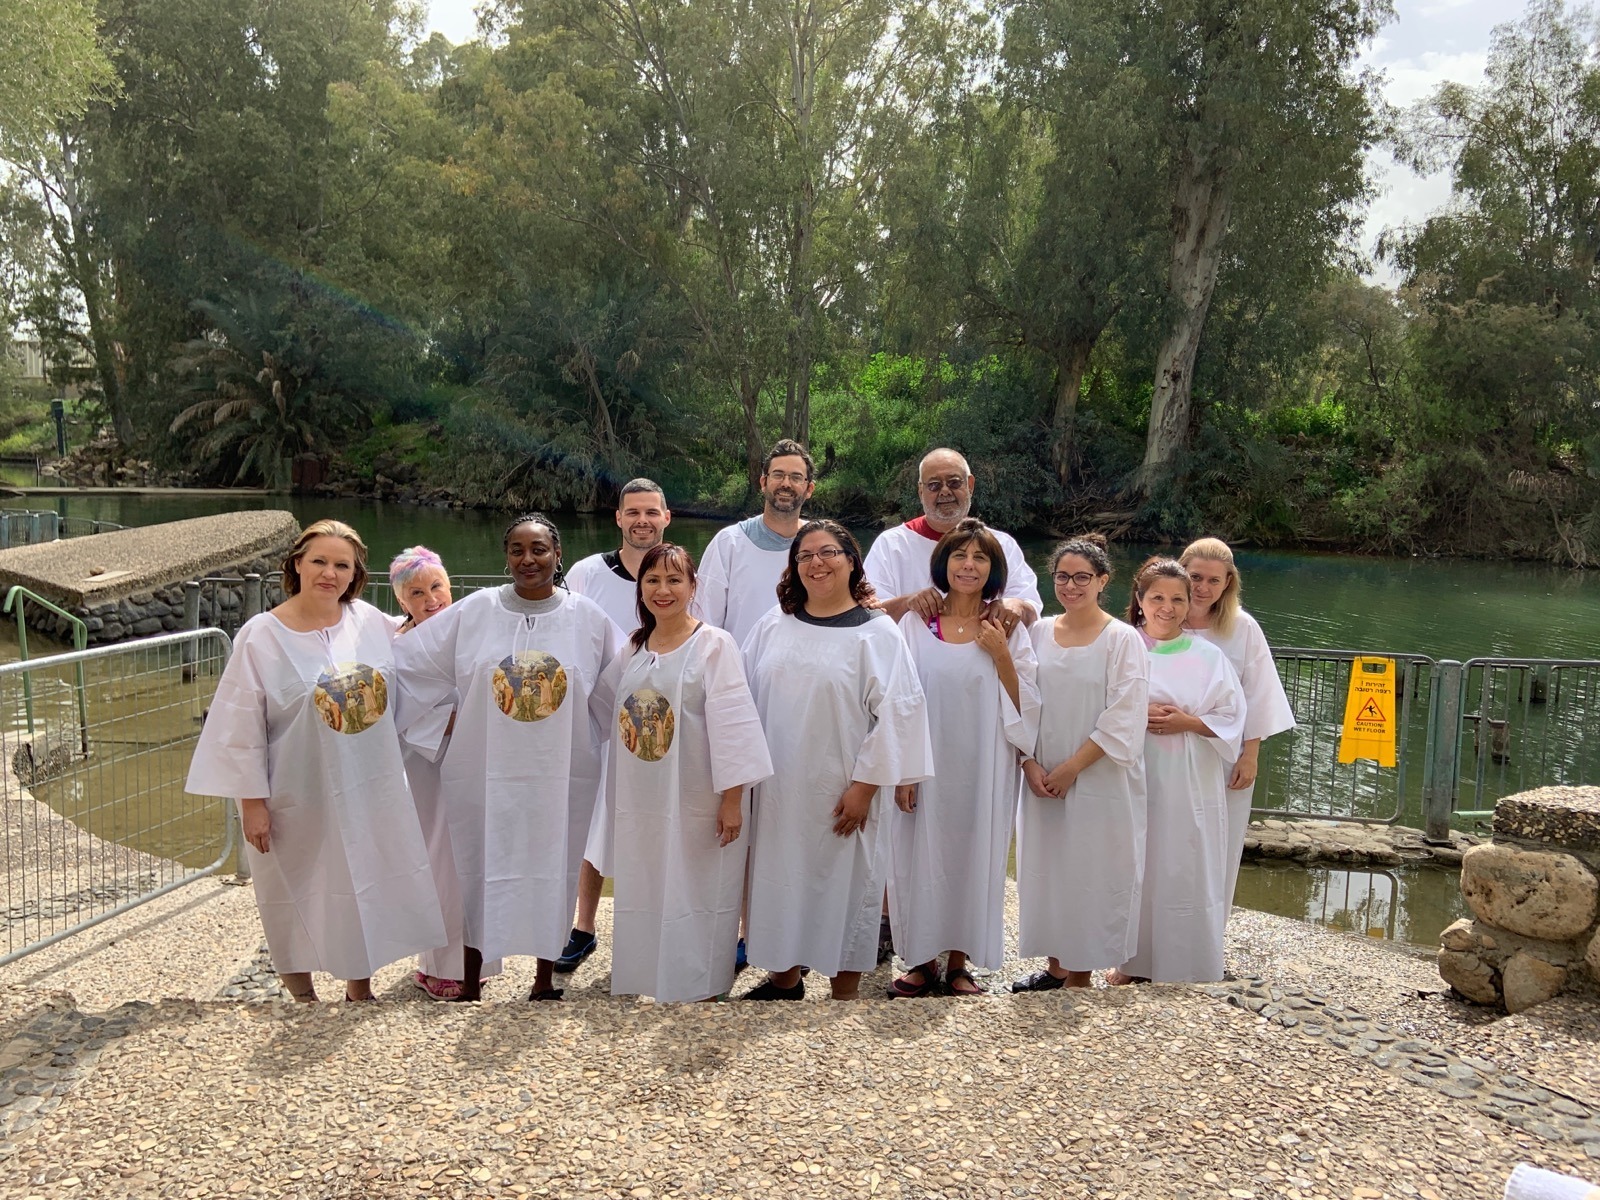 Our team being Baptized at the River Jordan